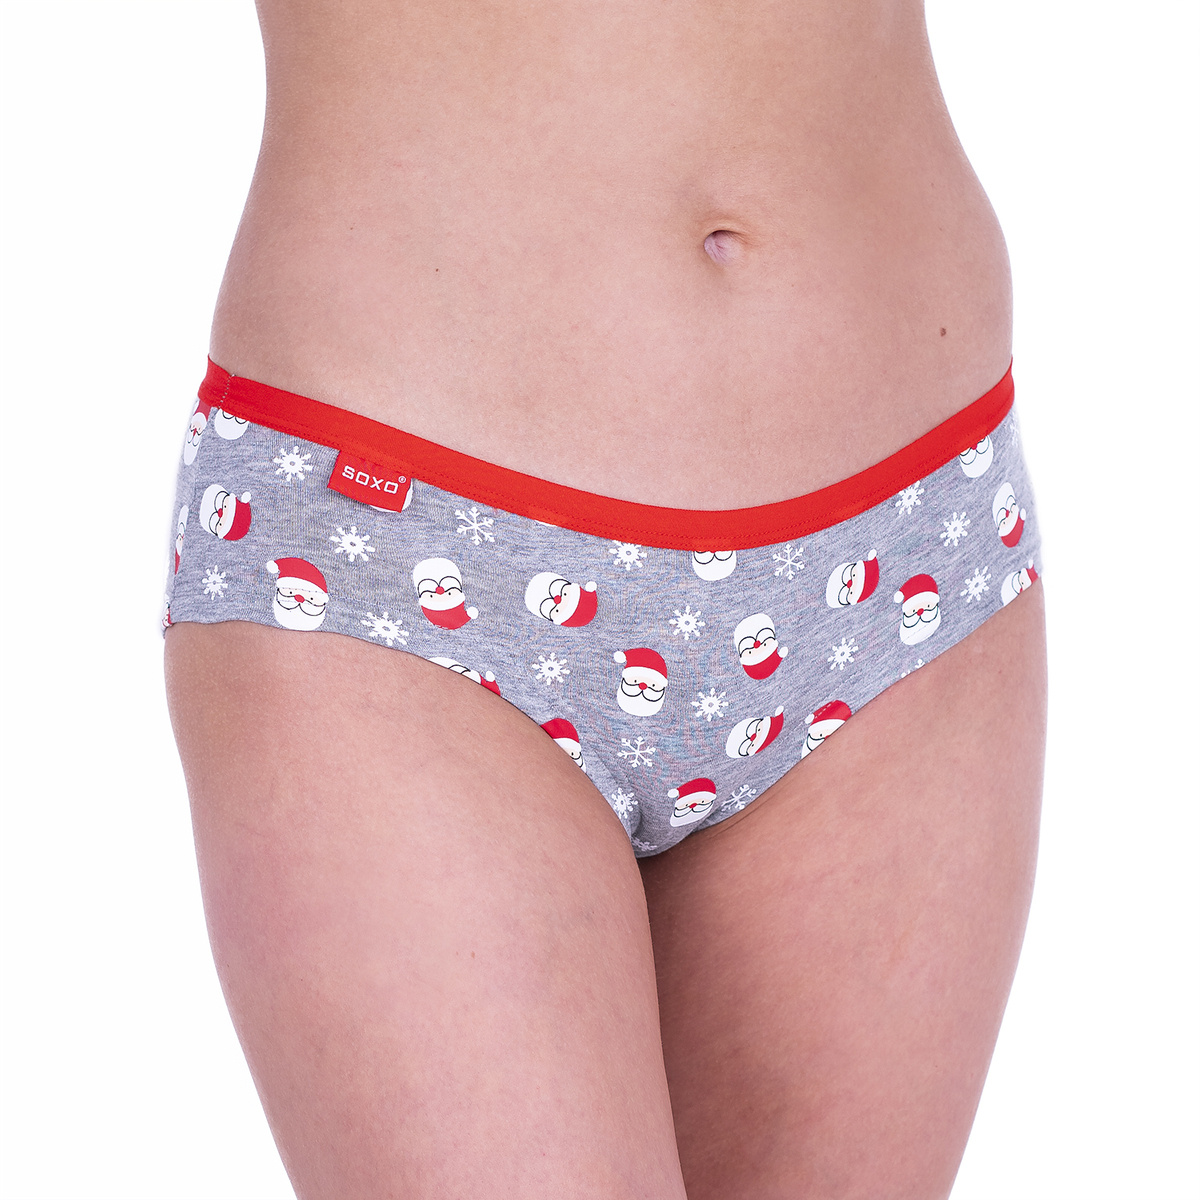 https://otosocks.com/eng_pl_4x-SOXO-womens-panties-a-perfect-Christmas-gift-for-her-23644_3.jpg